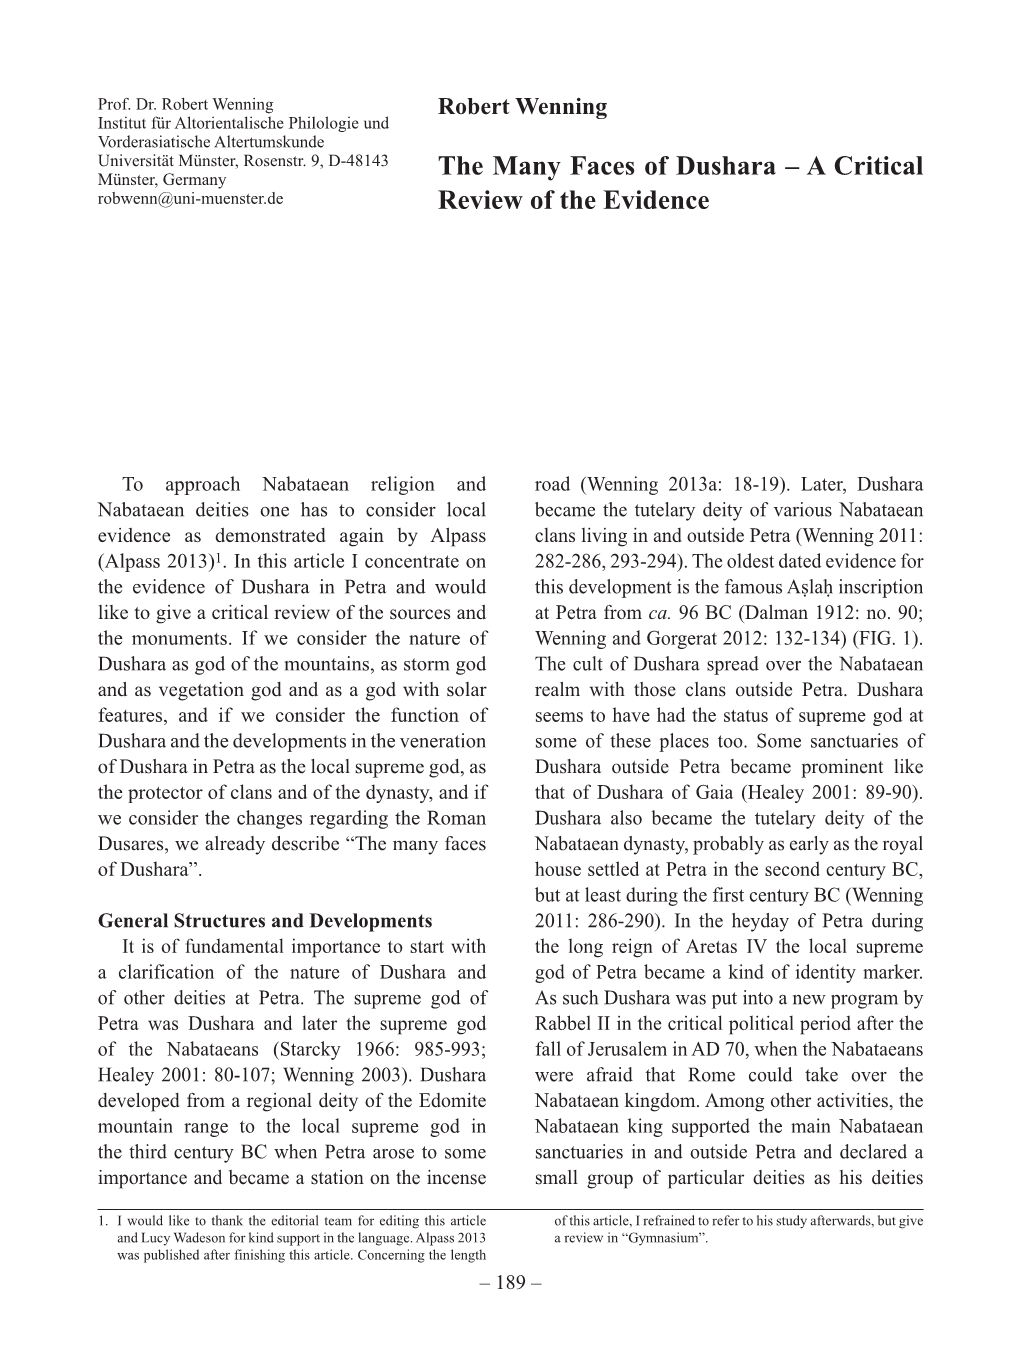 The Many Faces of Dushara – a Critical Review of the Evidence